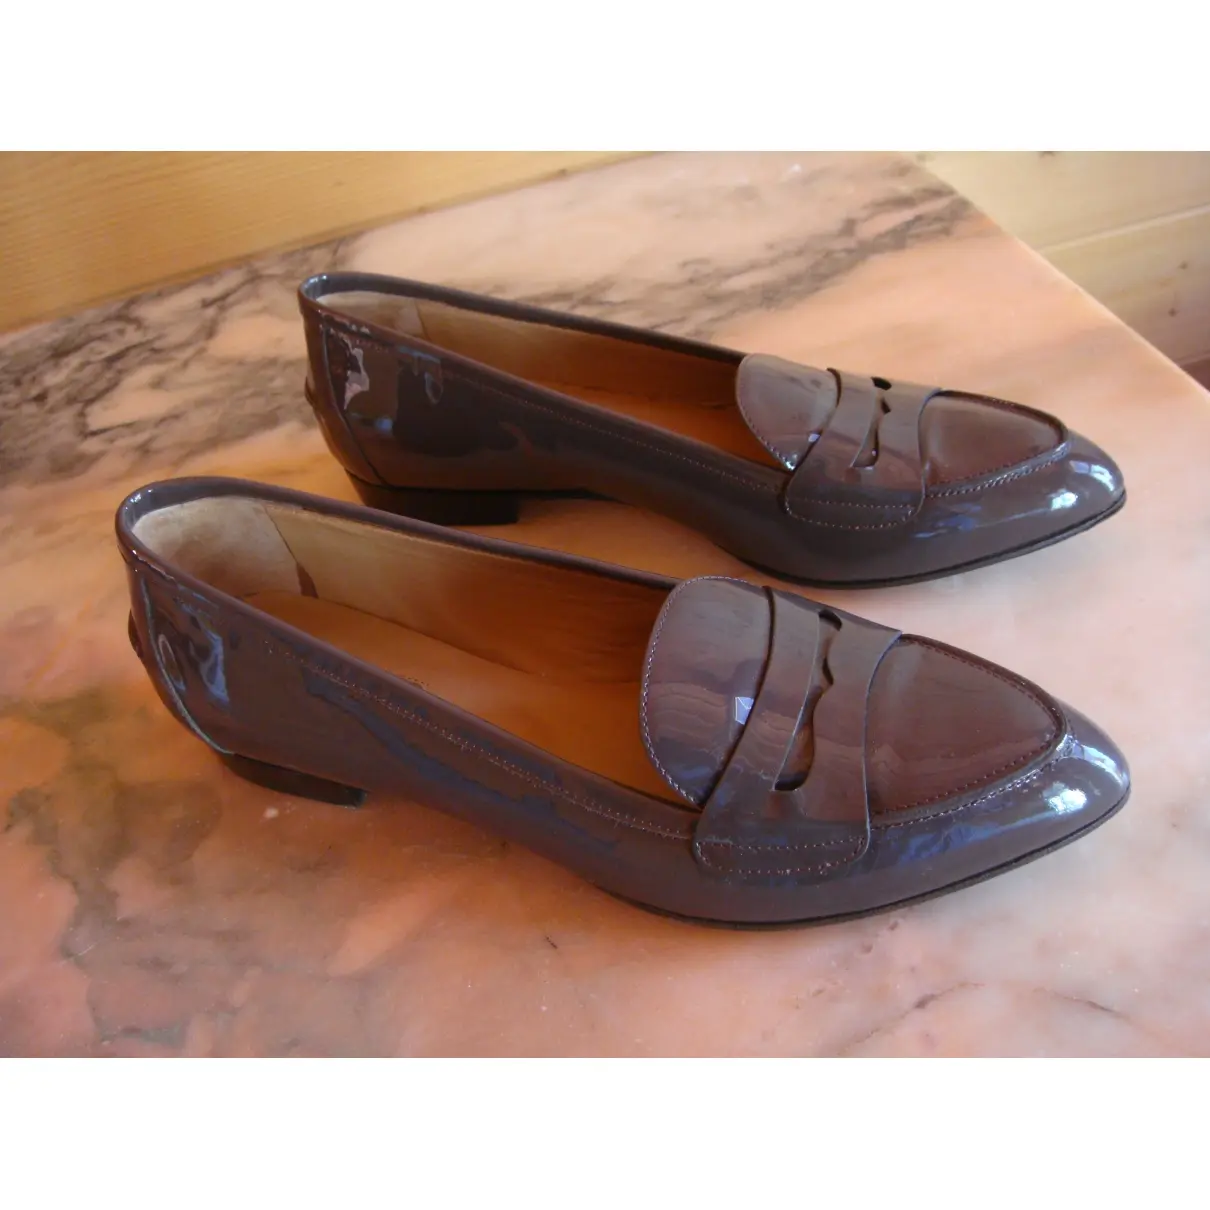 Fratelli Rossetti Patent leather flats for sale